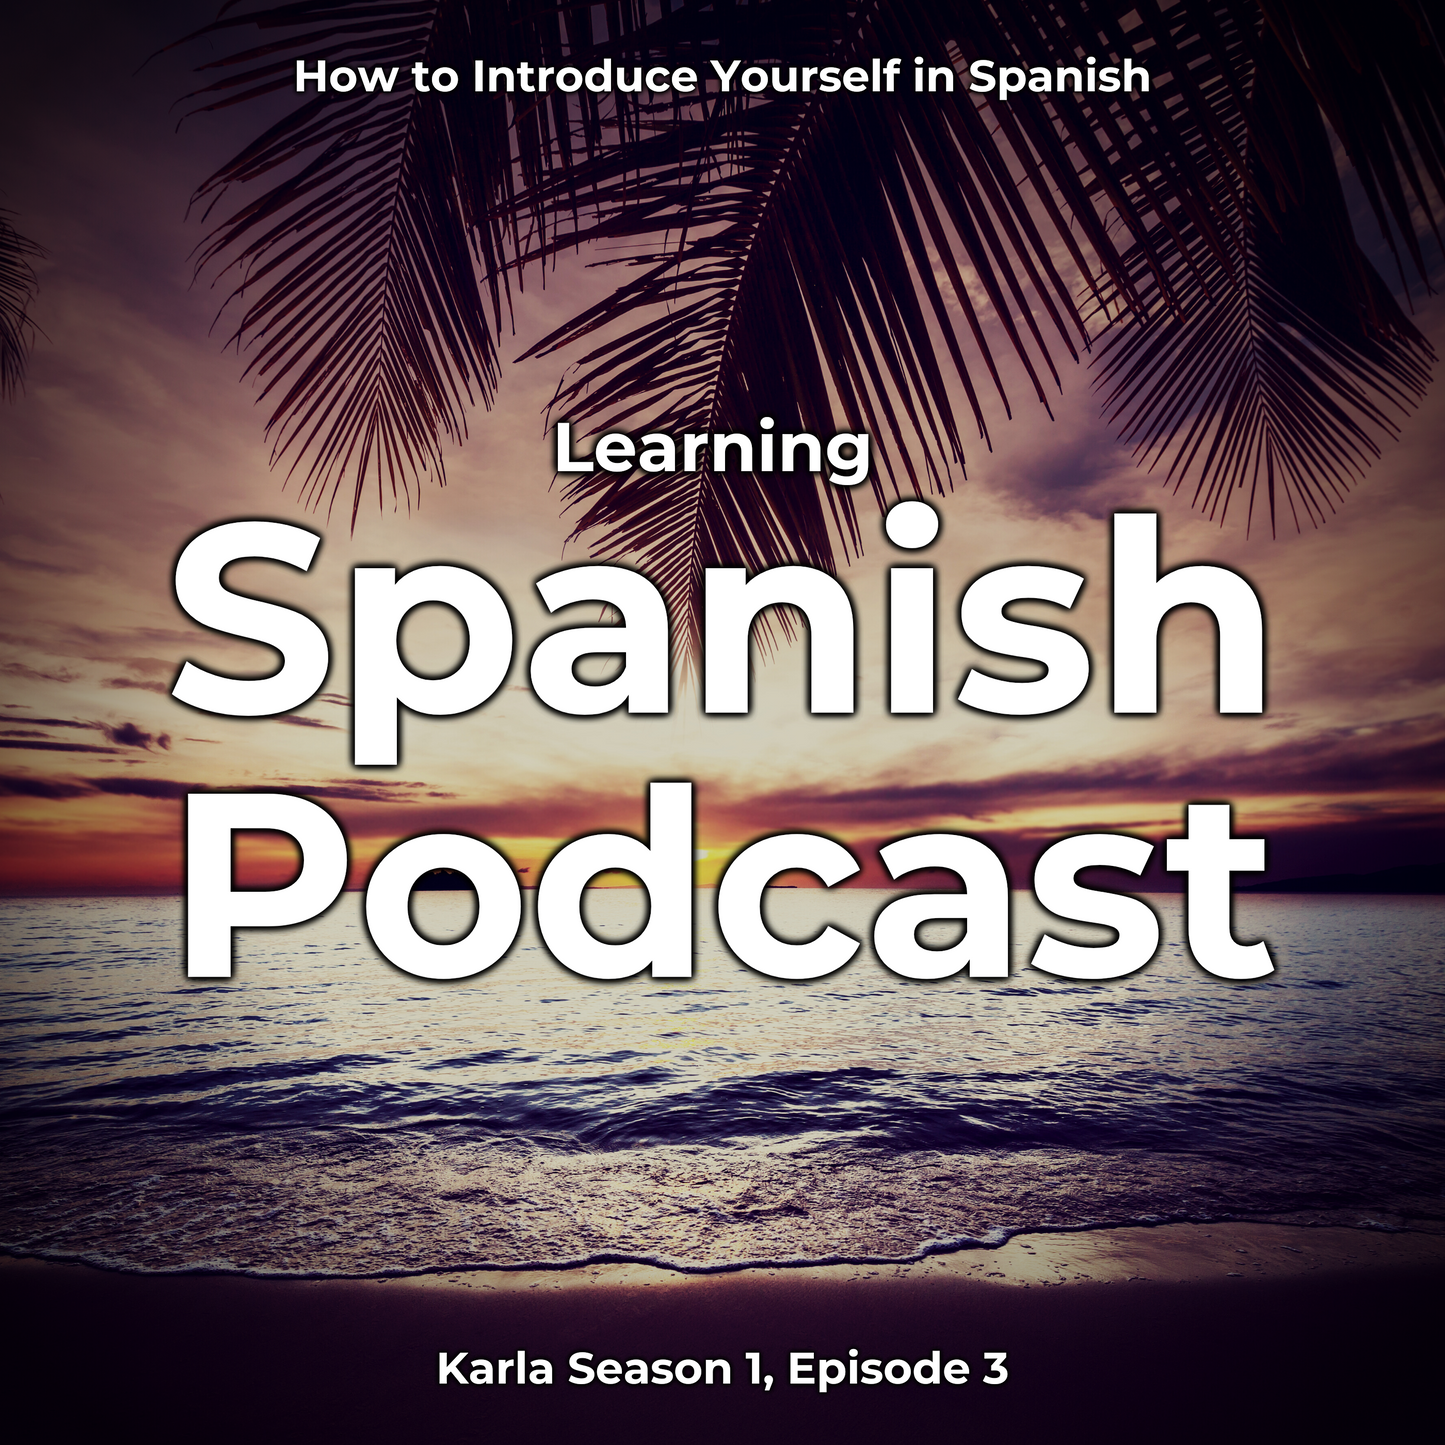 Learning Spanish Podcast: How to introduce yourself in Spanish (Karla Season 1, Episode 3)